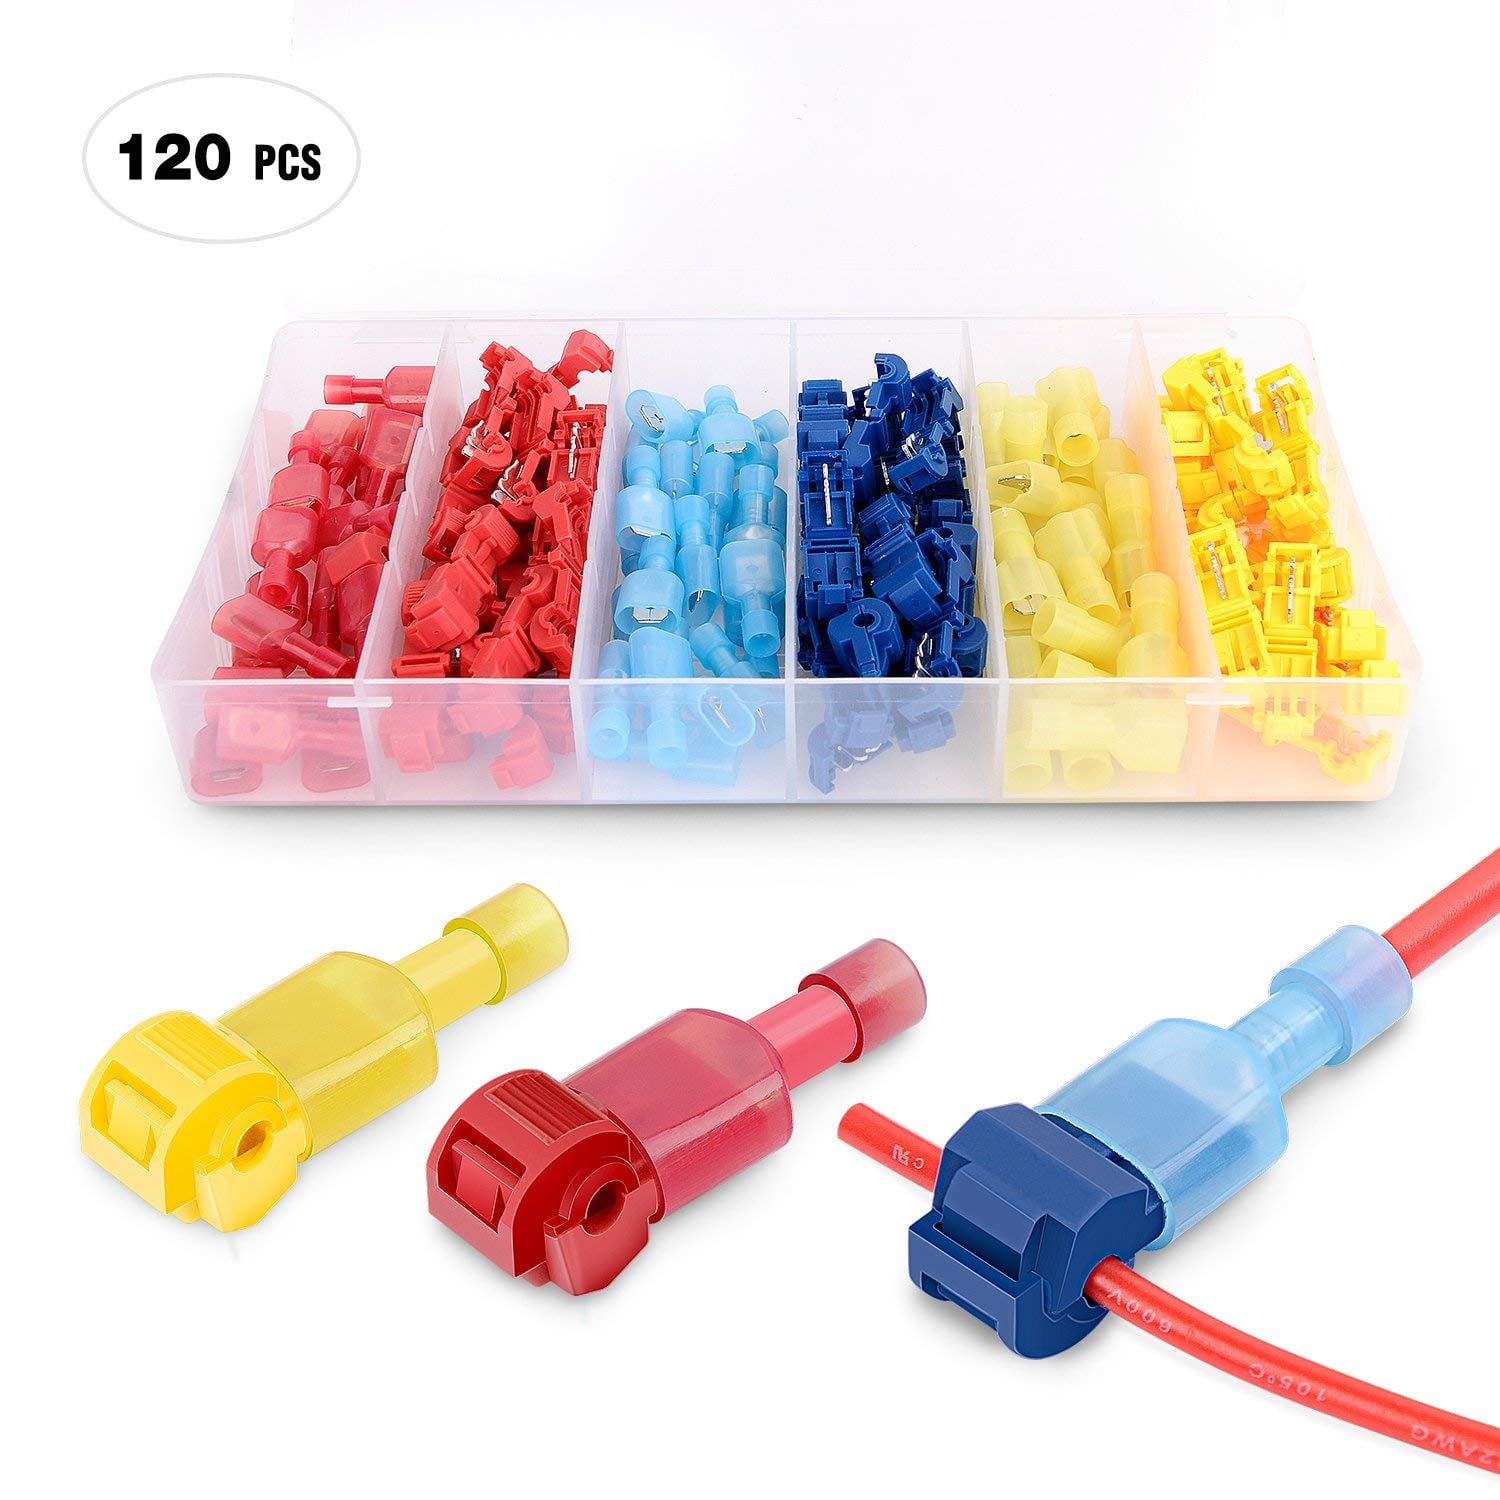 Nilight 120 Pcs/60 Pairs Quick Splice Wire Terminals T-Tap Self-stripping  with Nylon Fully Insulated Male Quick Disconnects Kit, 2 Years Warranty 